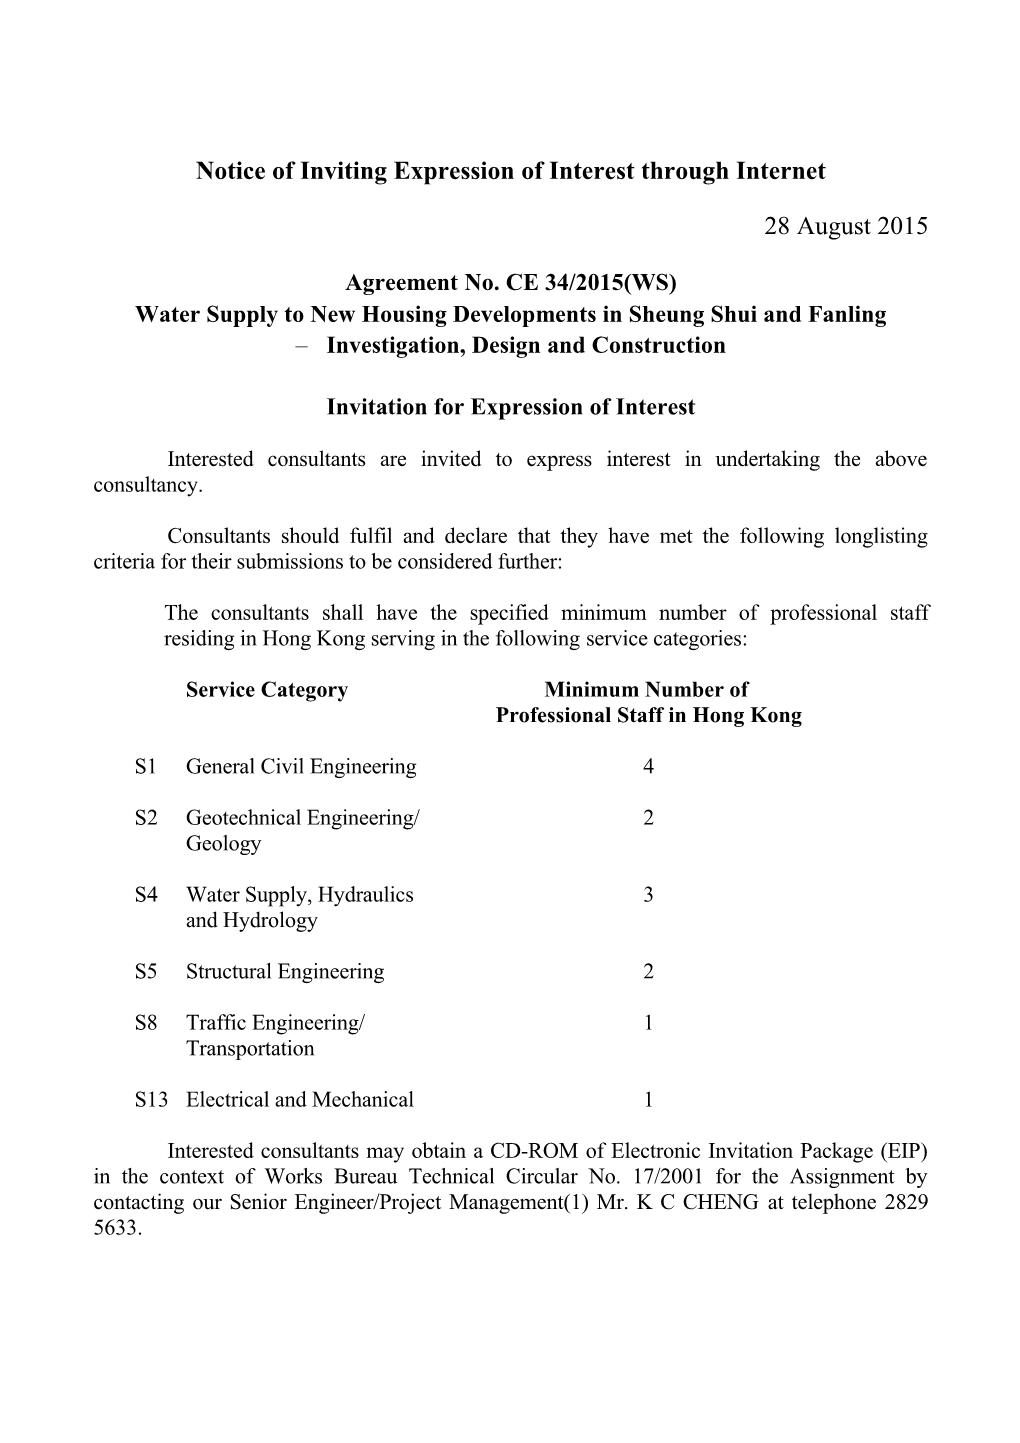 Notice of Inviting Expression of Interest Through Internet s1